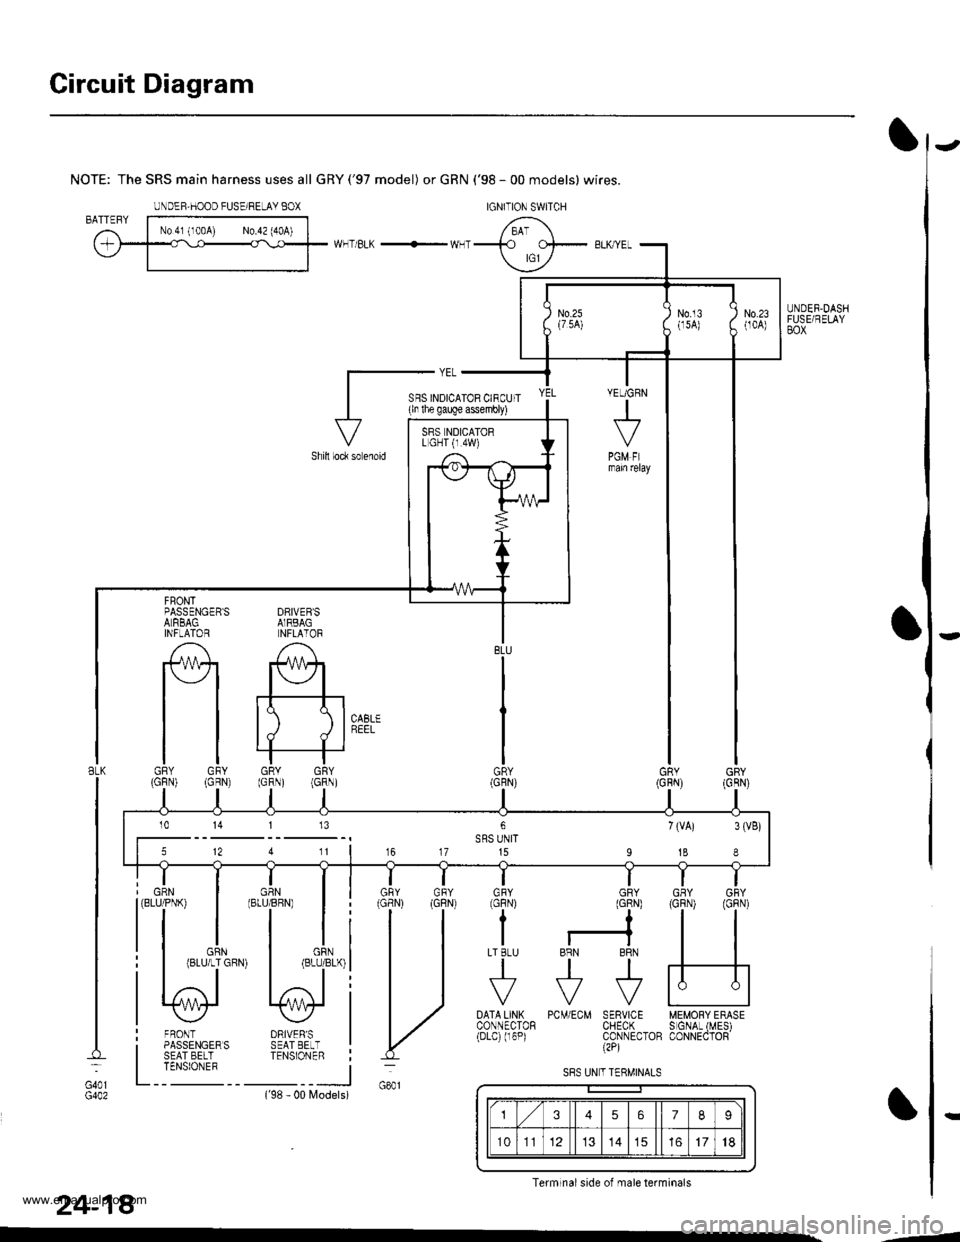 HONDA CR-V 2000 RD1-RD3 / 1.G Workshop Manual 
Circuit Diagram
UNDER.DASHFUSE/RELAYBOX
NOTE: The SRS main harness uses all GRY(97 model) or GRN (98 - 00 models) wires.
WHT/BLK -- WHT
DRIVEBSAIRBAGNFLATOR
A
#+
tt tll./ d I
GRY GRY(GRN) (GRN)
F